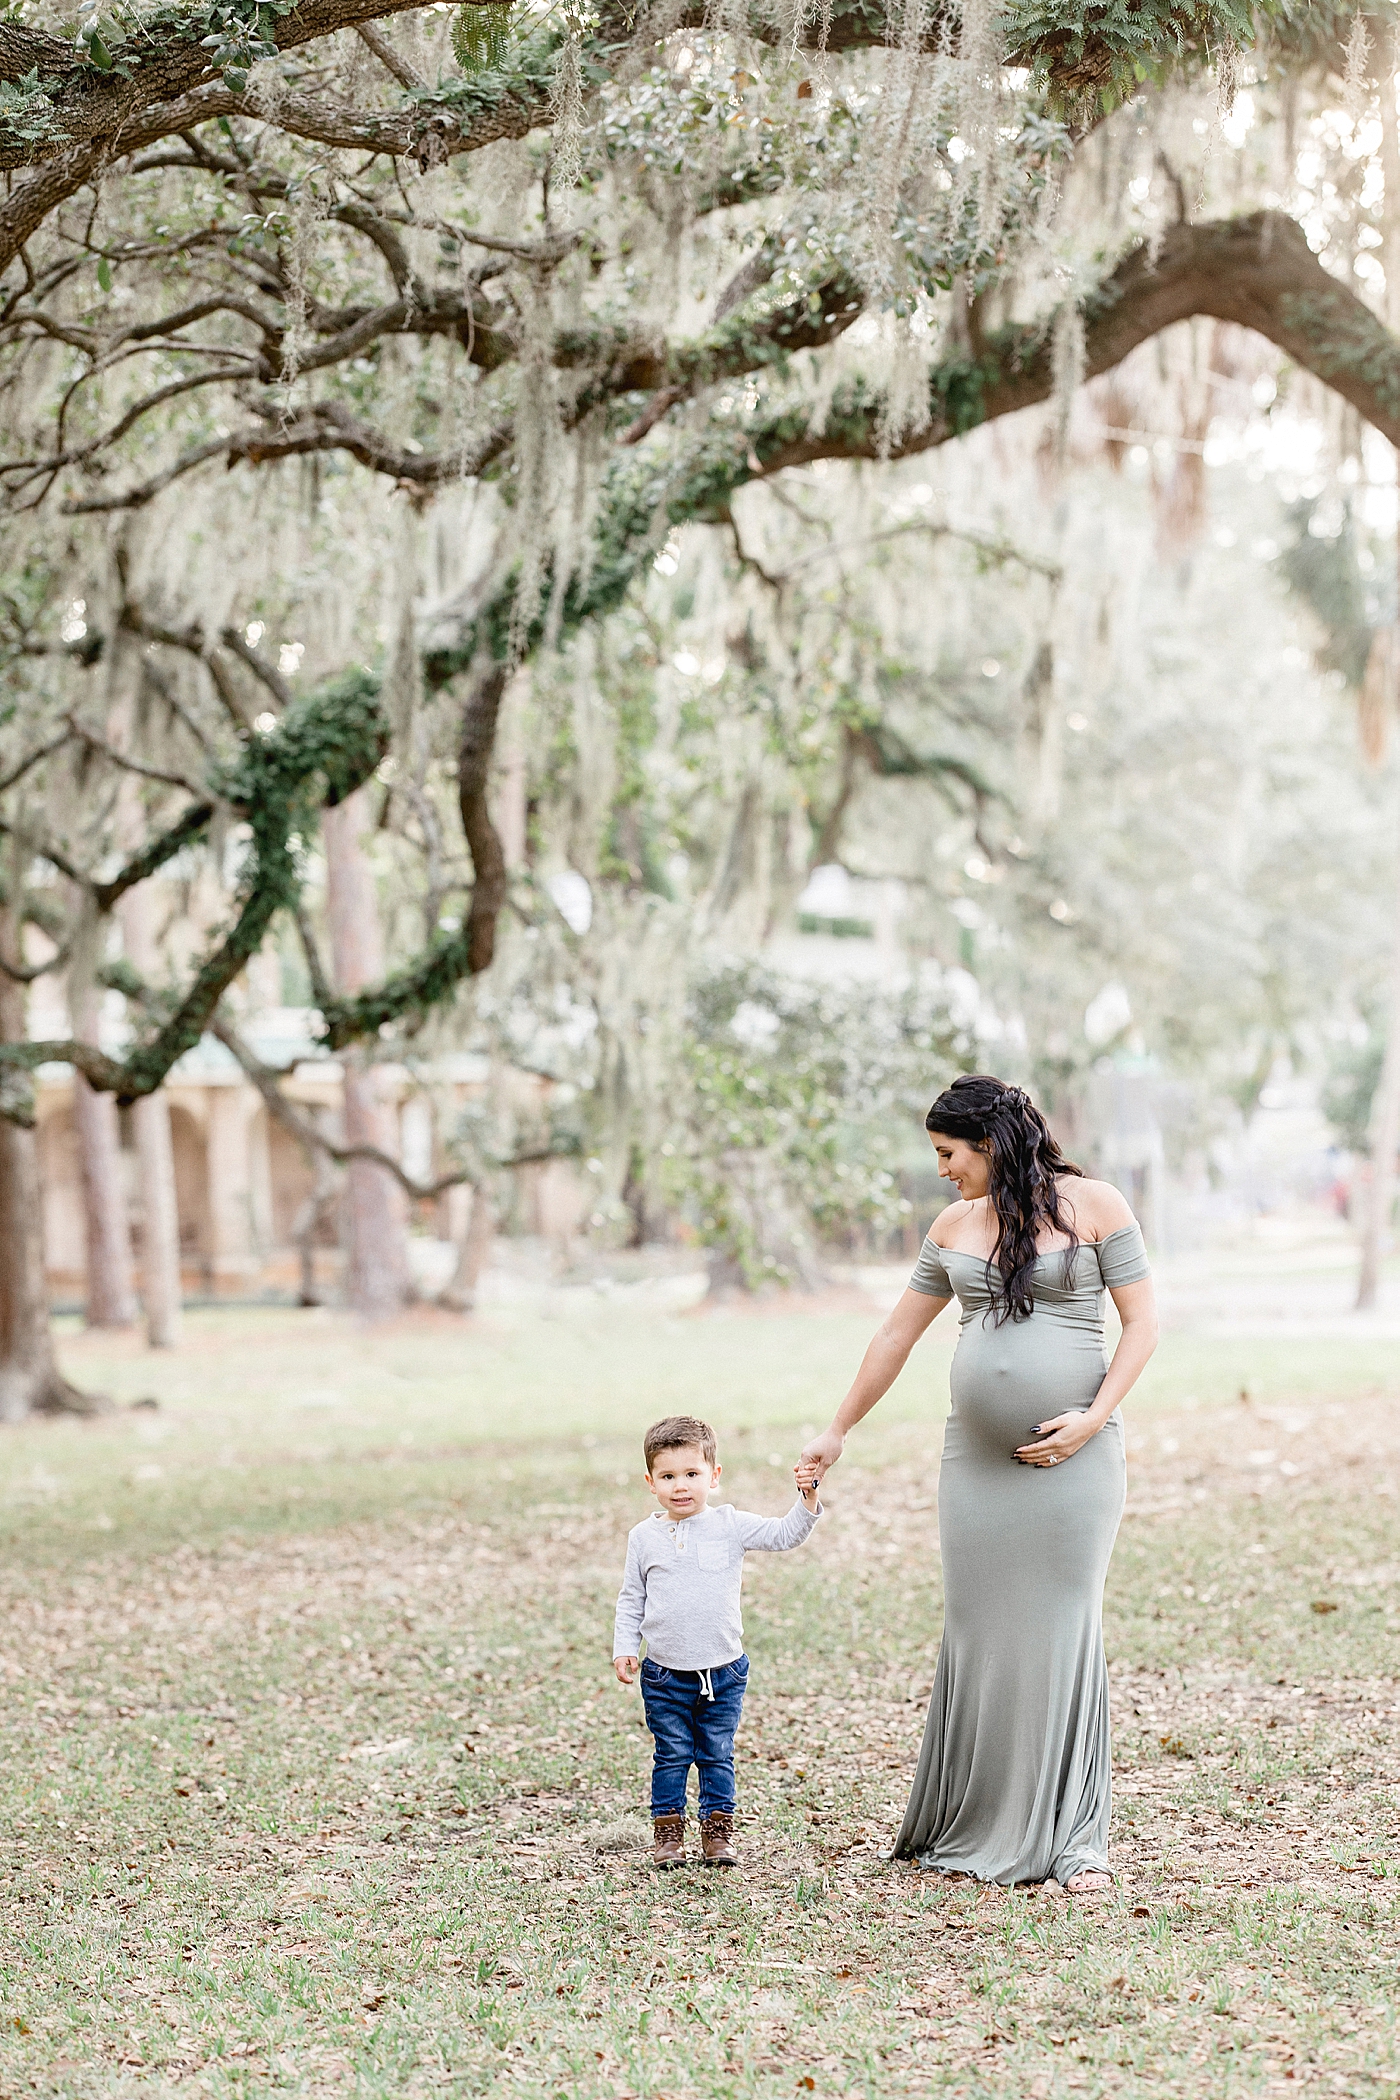 Mom and son walking together under the oaks during maternity session with Brittany Elise Photography.